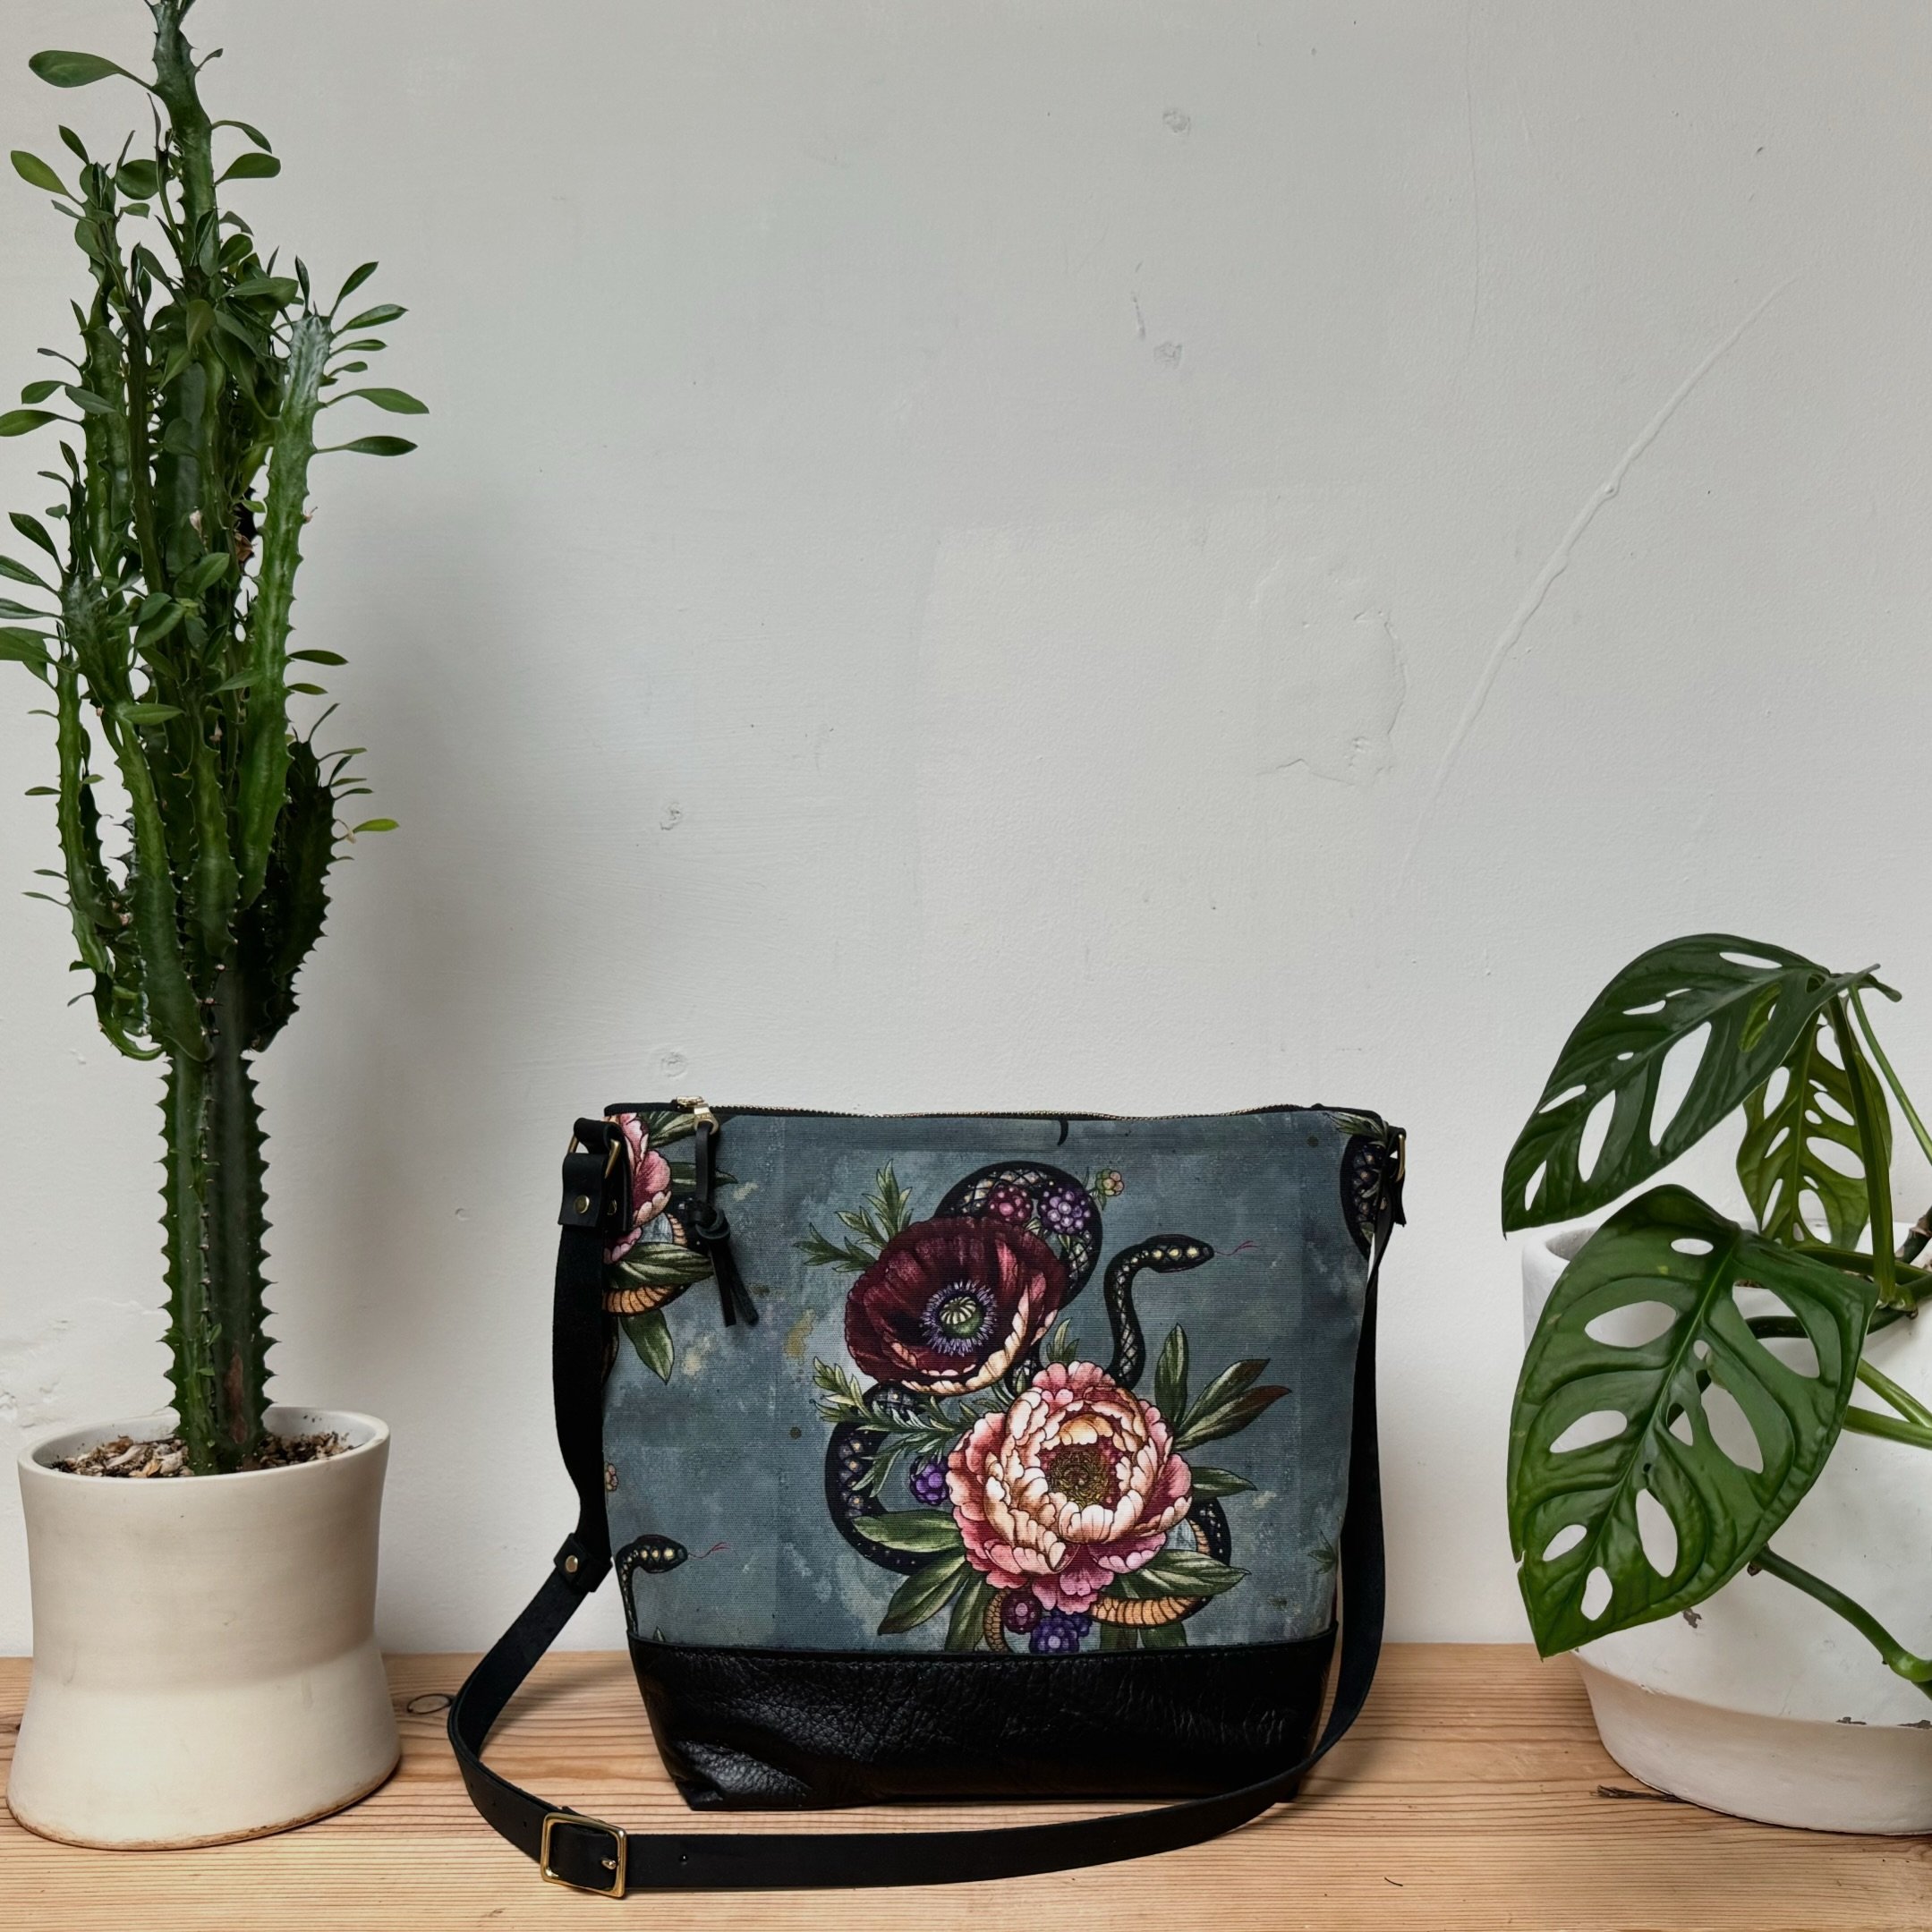 Finally! Our new bag style, the Coco Crossbody. Looking fabulous in the latest, gorgeous prints designed by @alicestattoos 💛 Shown here in Snake, Peony, Poppy and Honey Bee with black leather bottom. Has 4 interior pockets for organizing all the ess